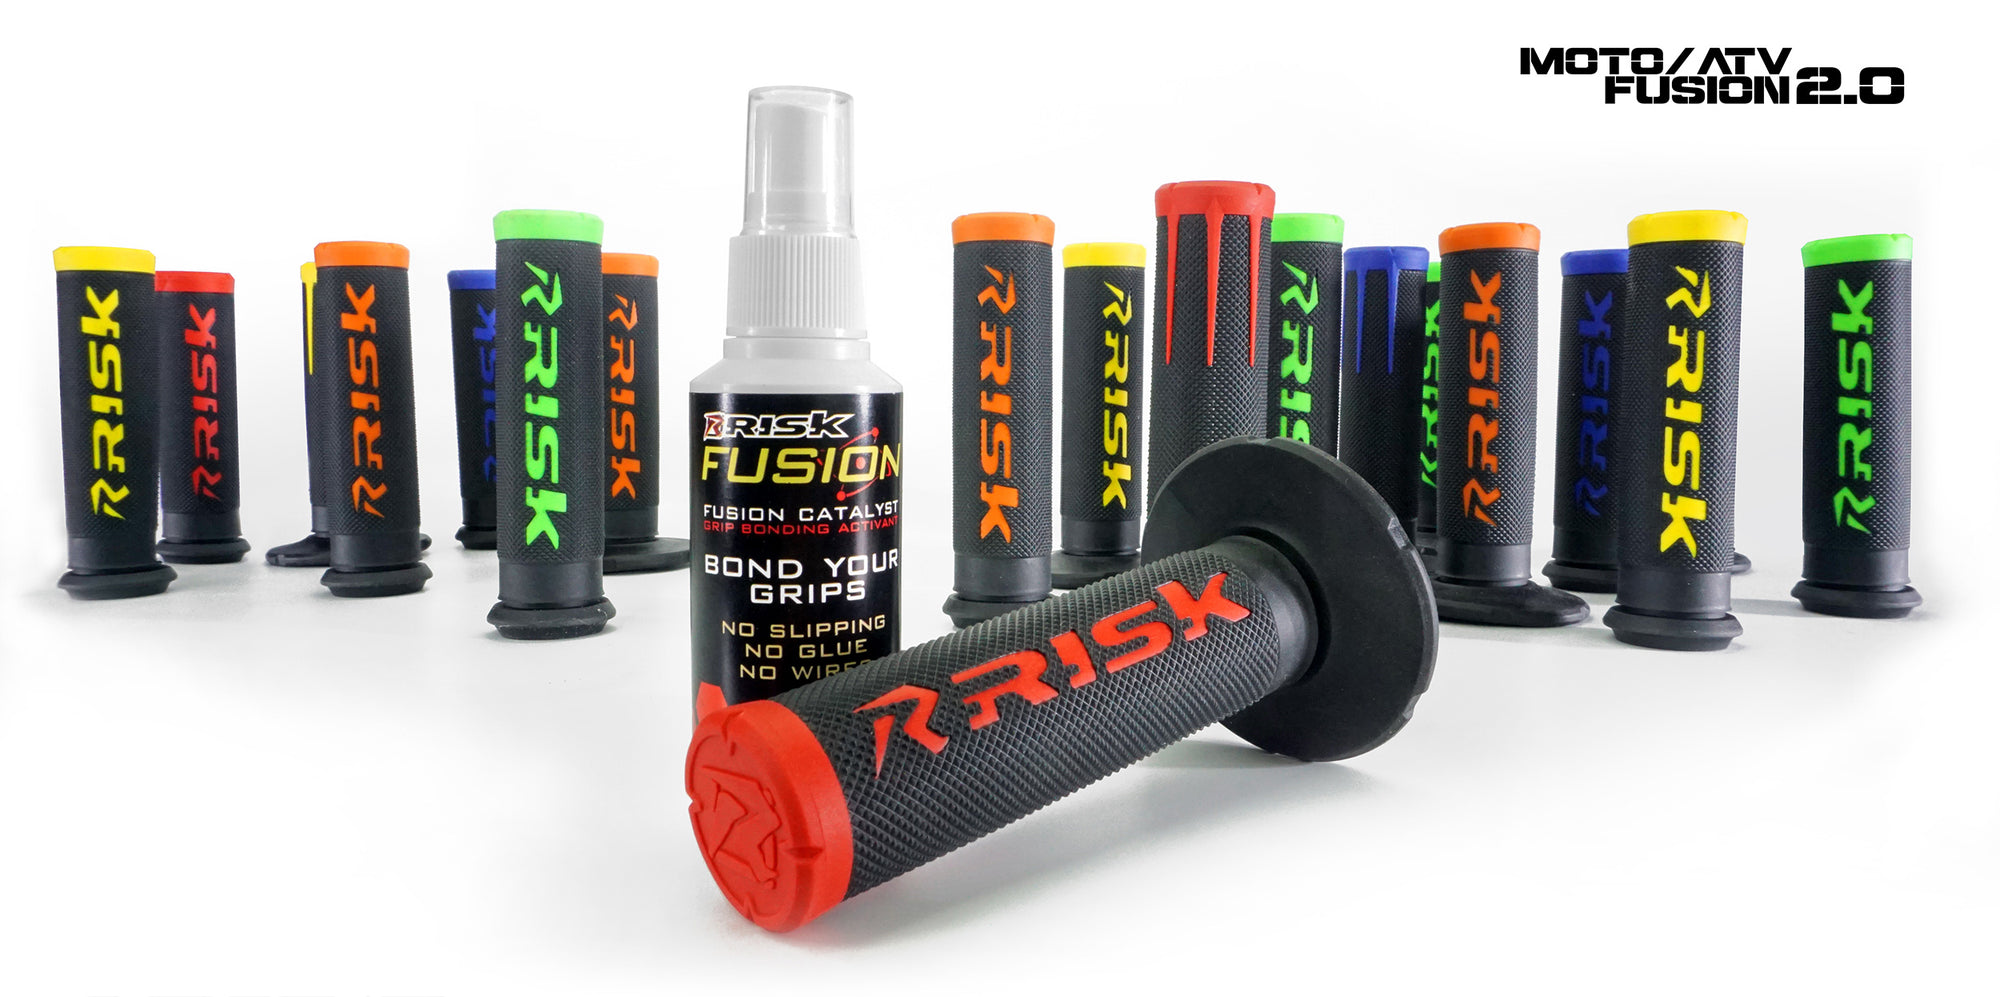 Fusion 2.0 Motocross/Dirtbike and ATV Grips // Risk Racing Europe